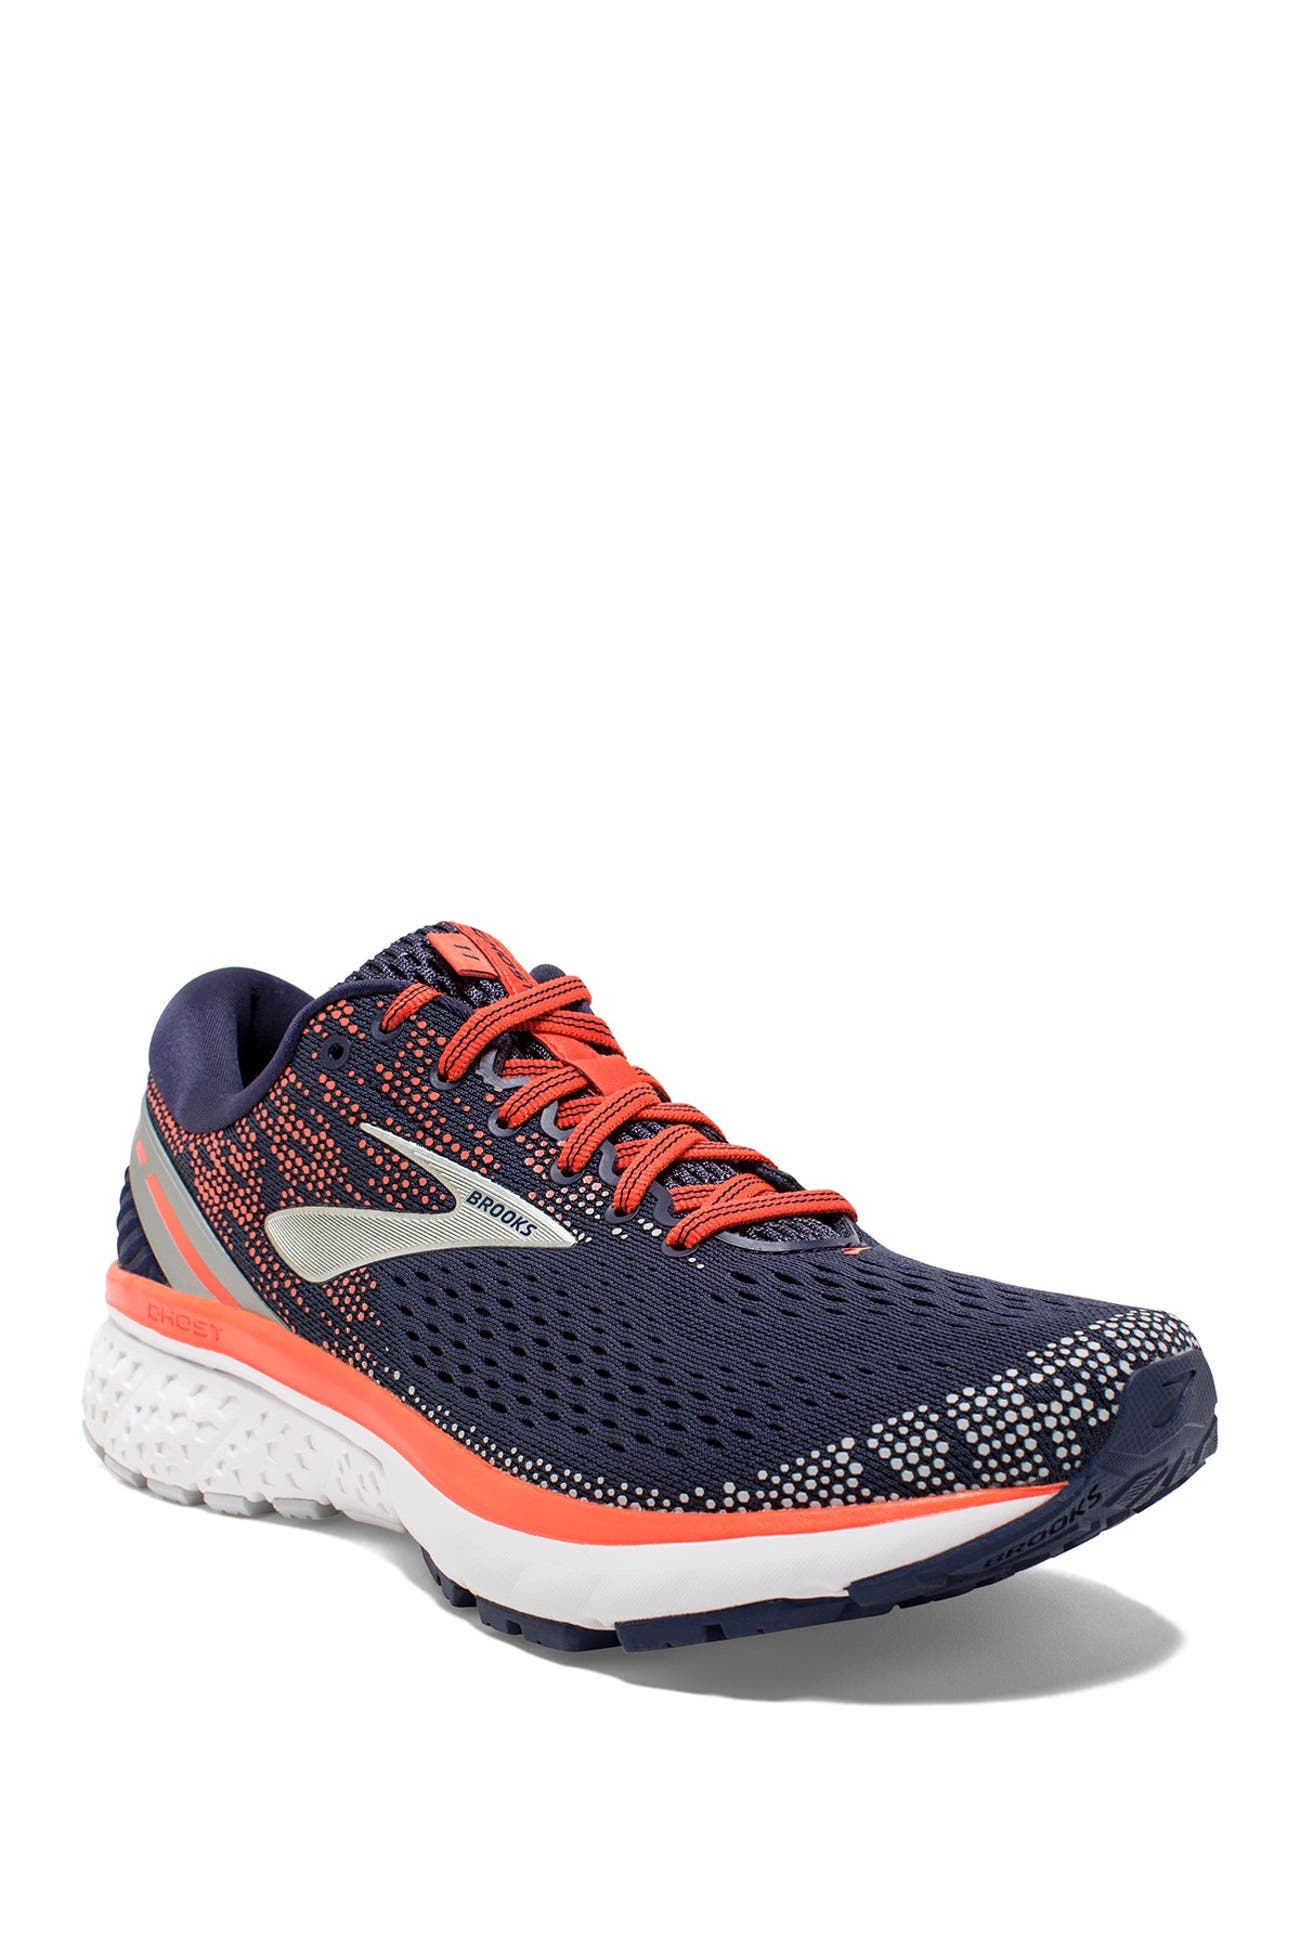 Brooks | Ghost 11 Running Shoe - Multiple Widths Available | Nordstrom Rack